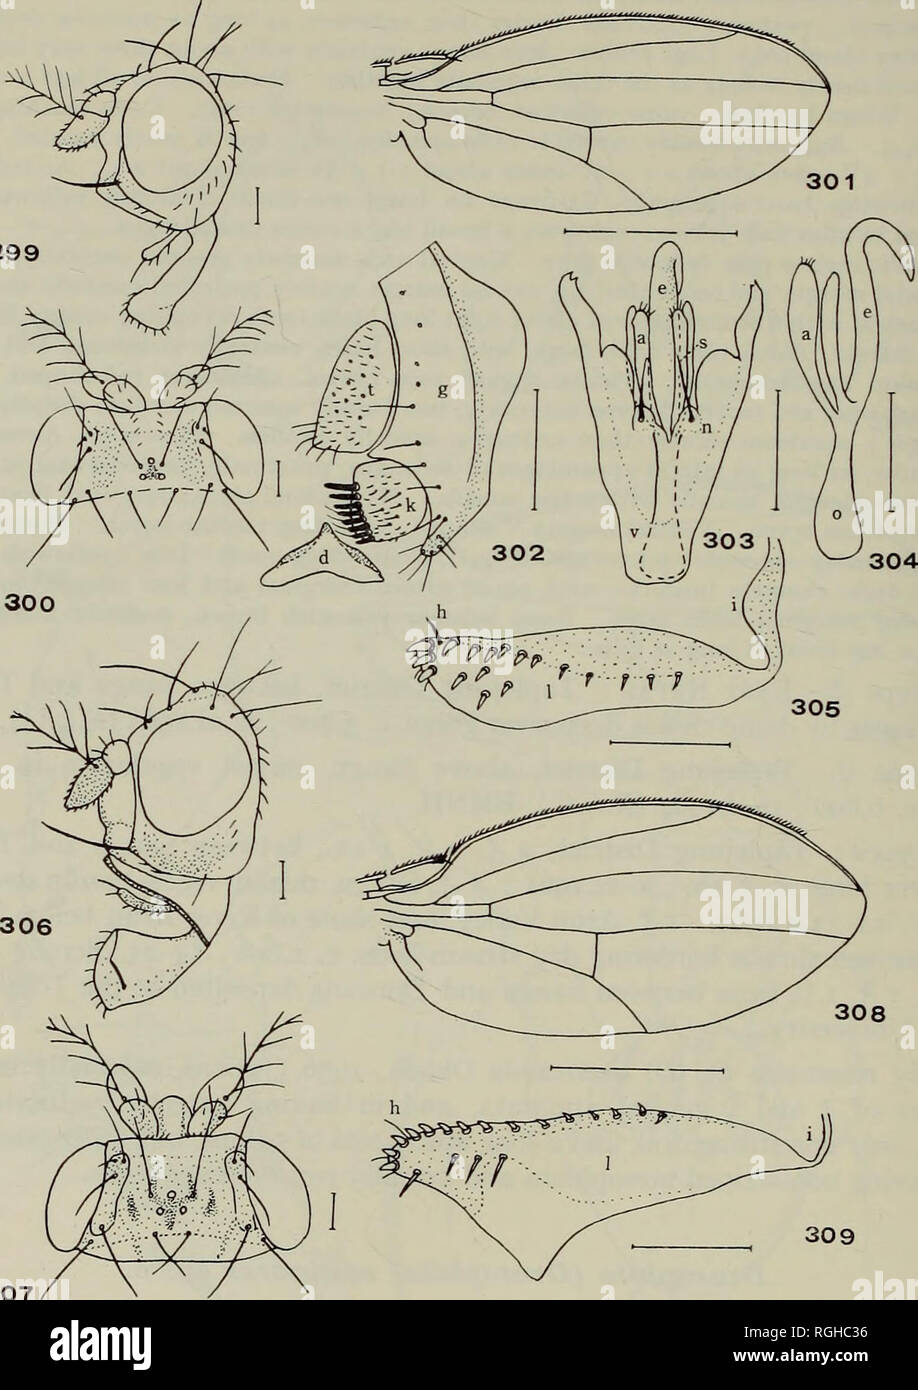 . Bulletin of the British Museum (Natural History) Entom Supp. 104 T. OKADA 299. 307 Figs. 299-309. 299-305, Drosophila (Drosophila) flexicauda sp. n. 299, &lt;$ head, lateral aspect ; 300, 5&quot; head, dorsal aspect ; 301, &lt;J wing ; 302, periphallic organs,' lateral aspect ; 303, phallic organs, ventral aspect ; 304, aedeagus, lateral aspect, dextral side dorsal ; 305, $ egg-guide. 306-309, Drosophila {Drosophila) editinares sp. n., $. 306, head, lateral aspect ; 307, head, dorsal aspect ; 308, wing ; 309, egg-guide. '. Please note that these images are extracted from scanned page images  Stock Photo